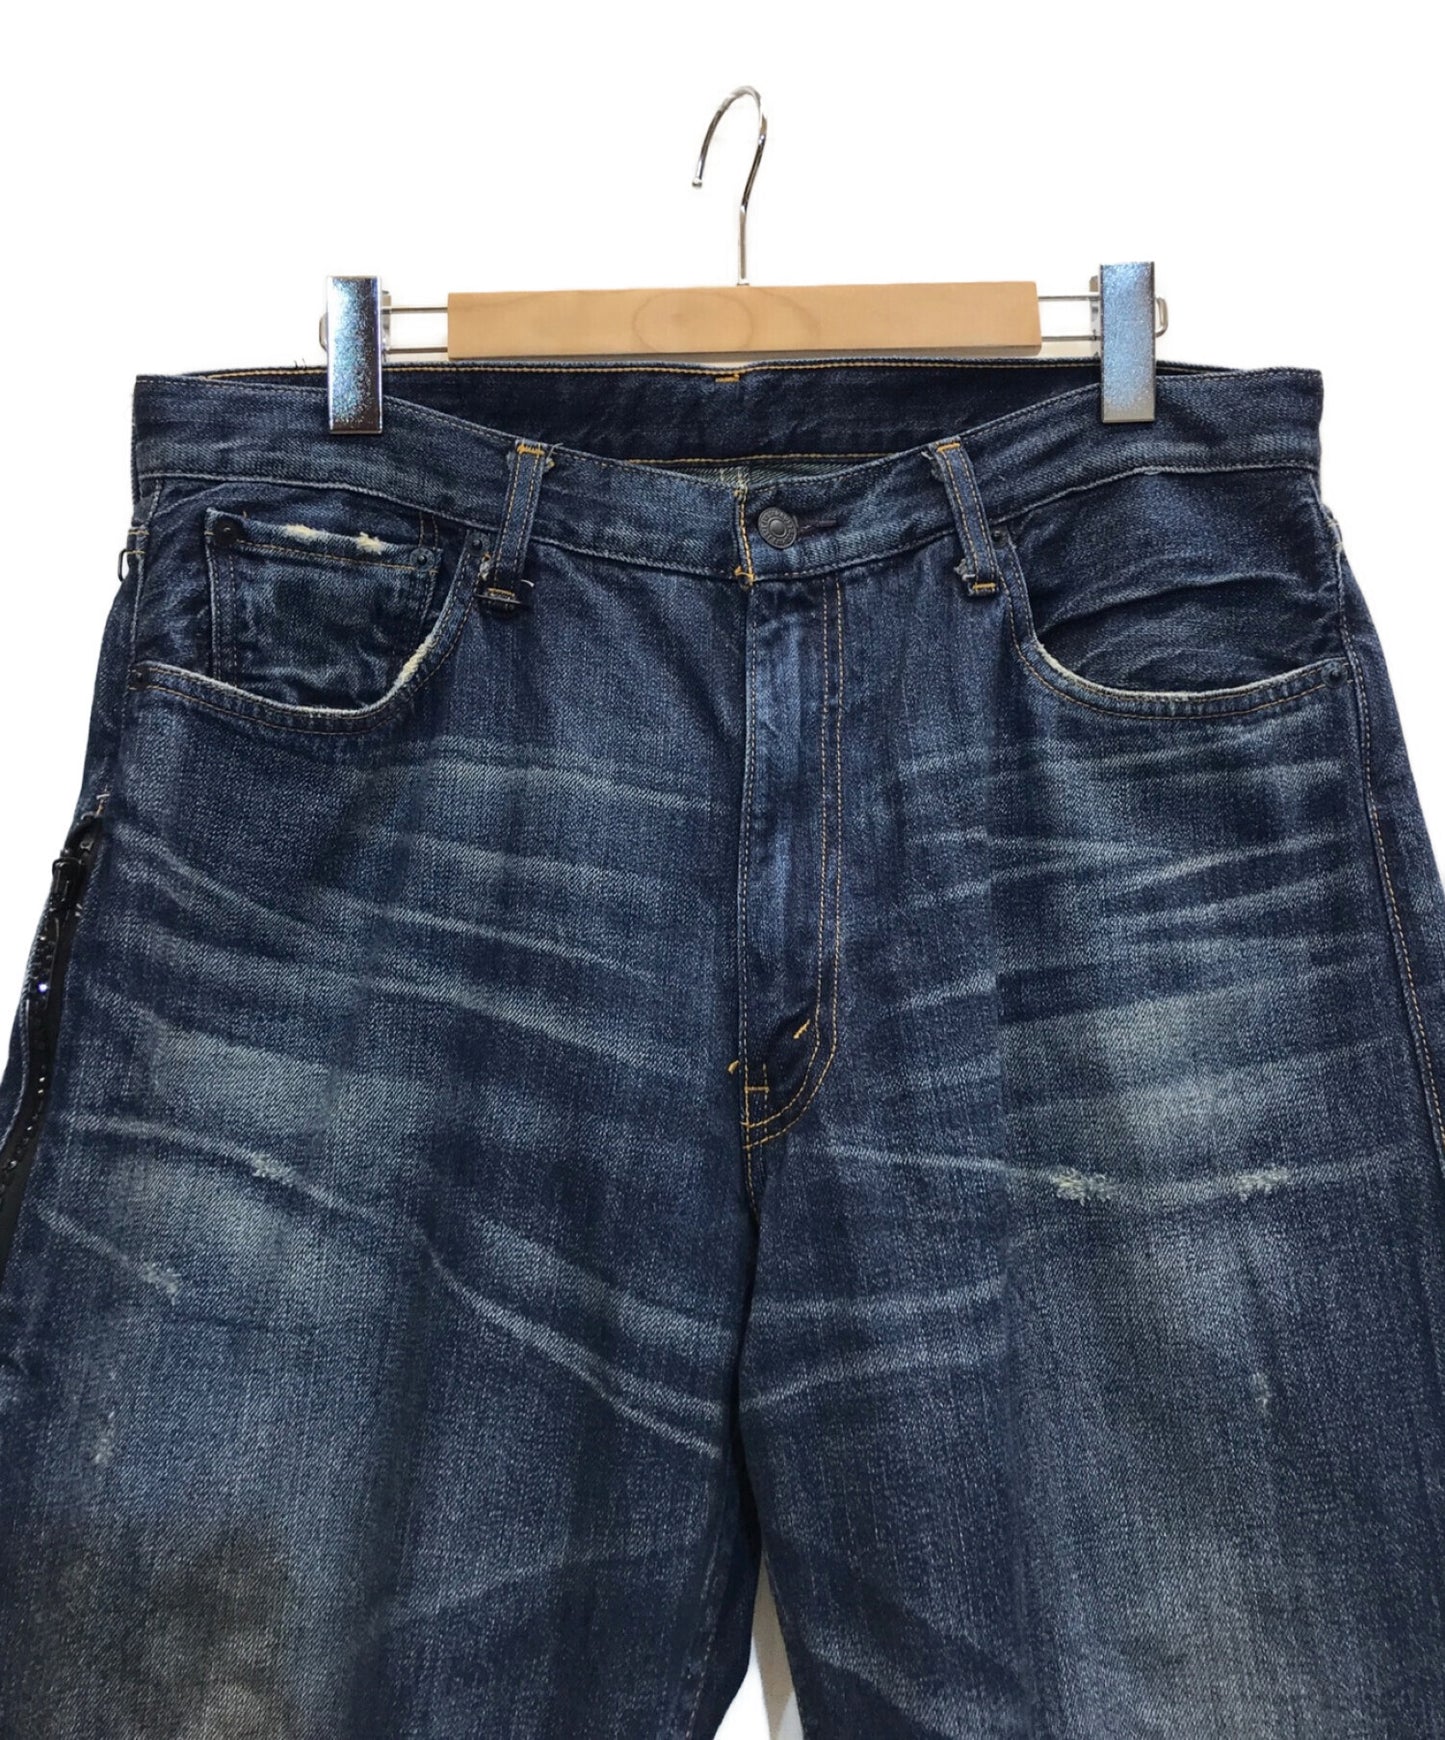 [Pre-owned] LEVI'S FENOM Special Order 505 Busy Studded Denim Pants UE505-0002